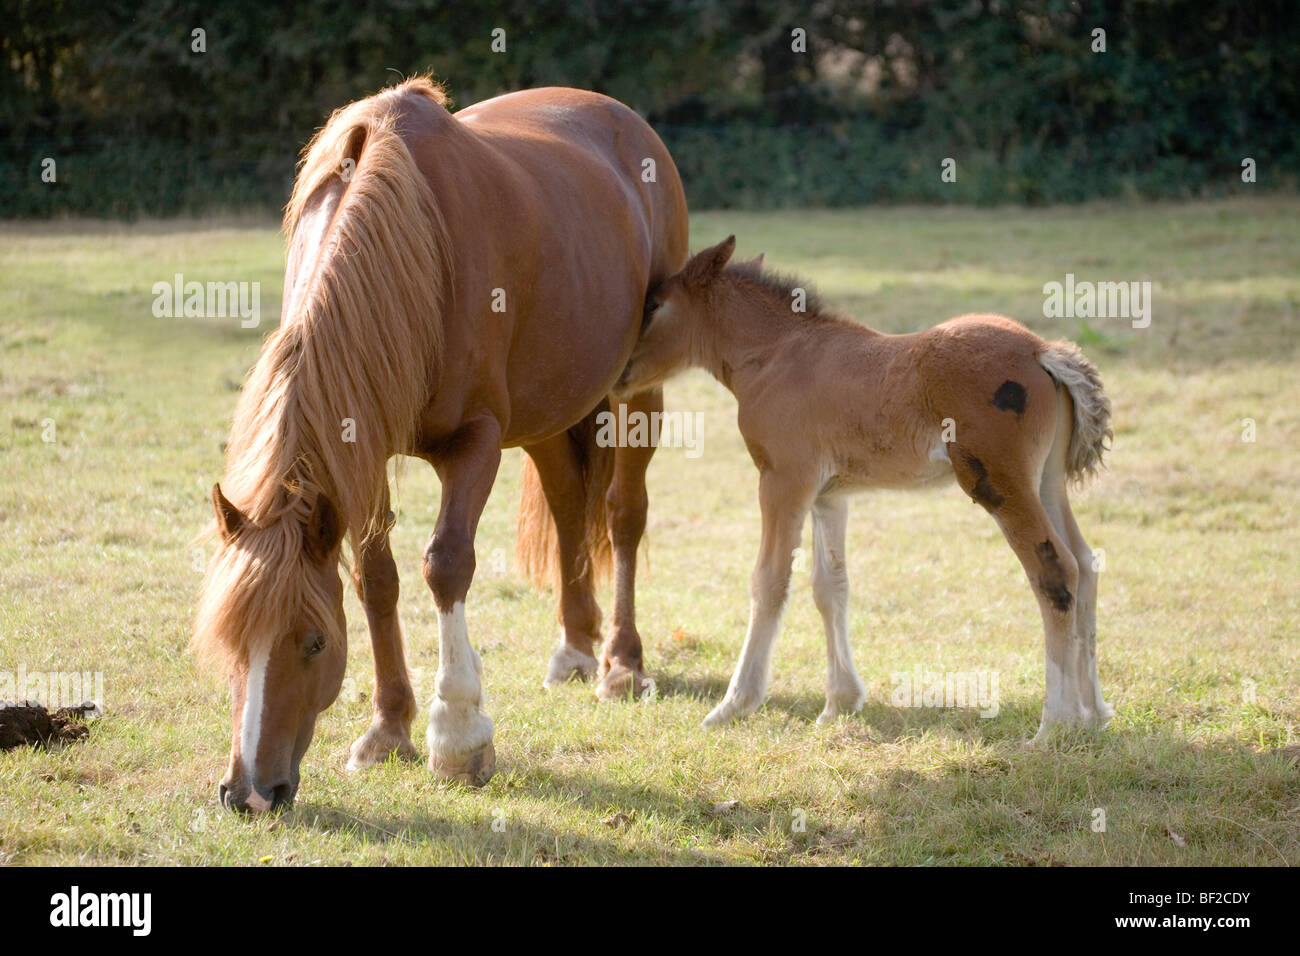 Three weeks old foal about to suckle suckle from Mare (Equus ferus). Domestic riding horse. Stock Photo